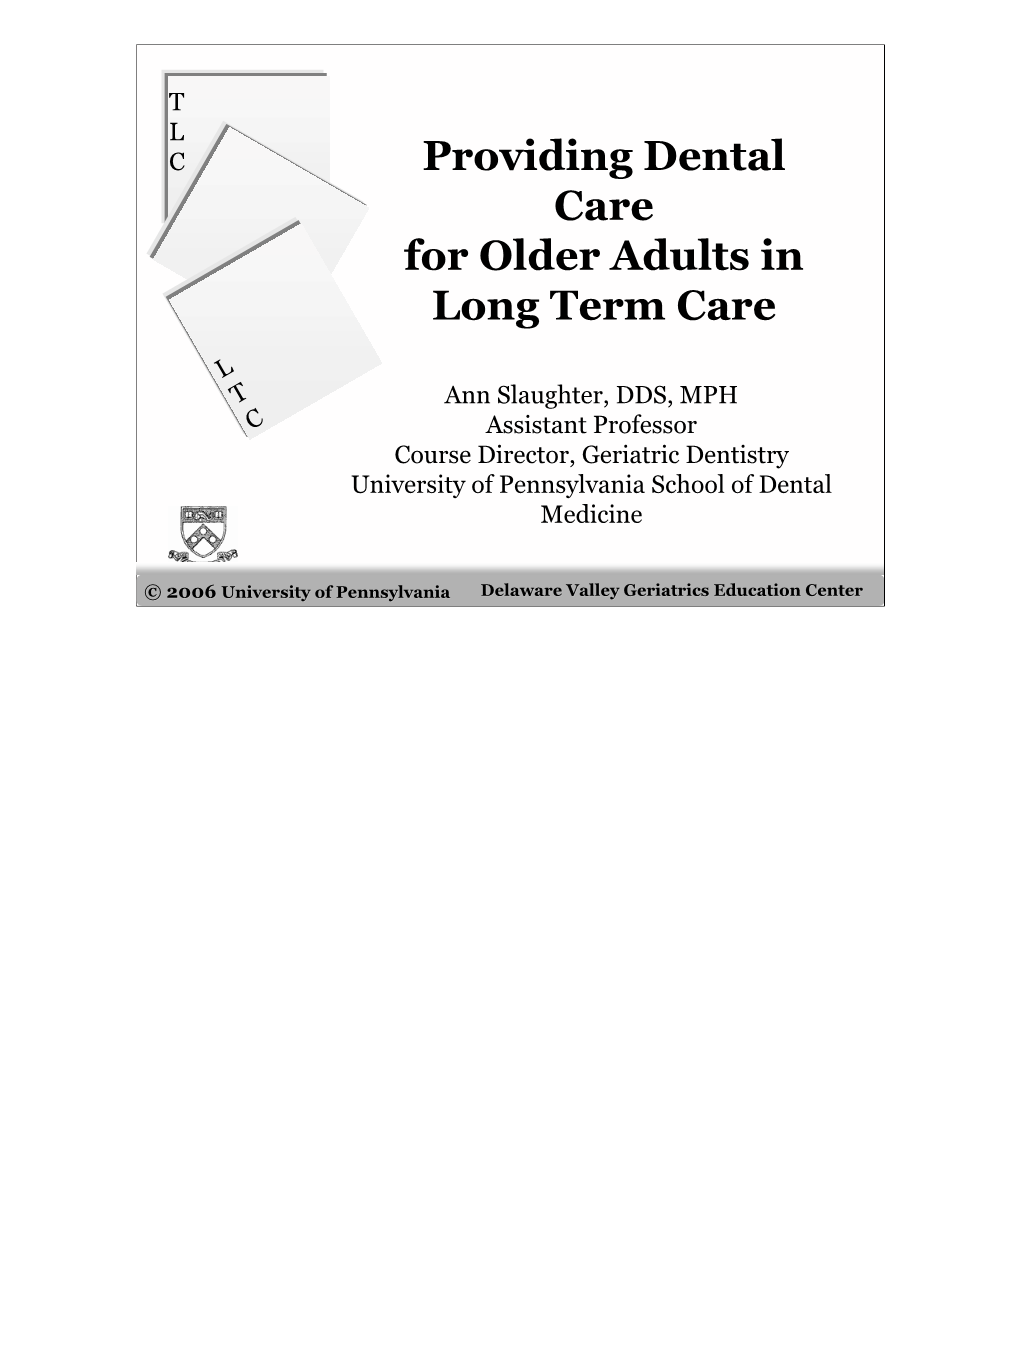 Providing Dental Care for Older Adults in Long Term Care